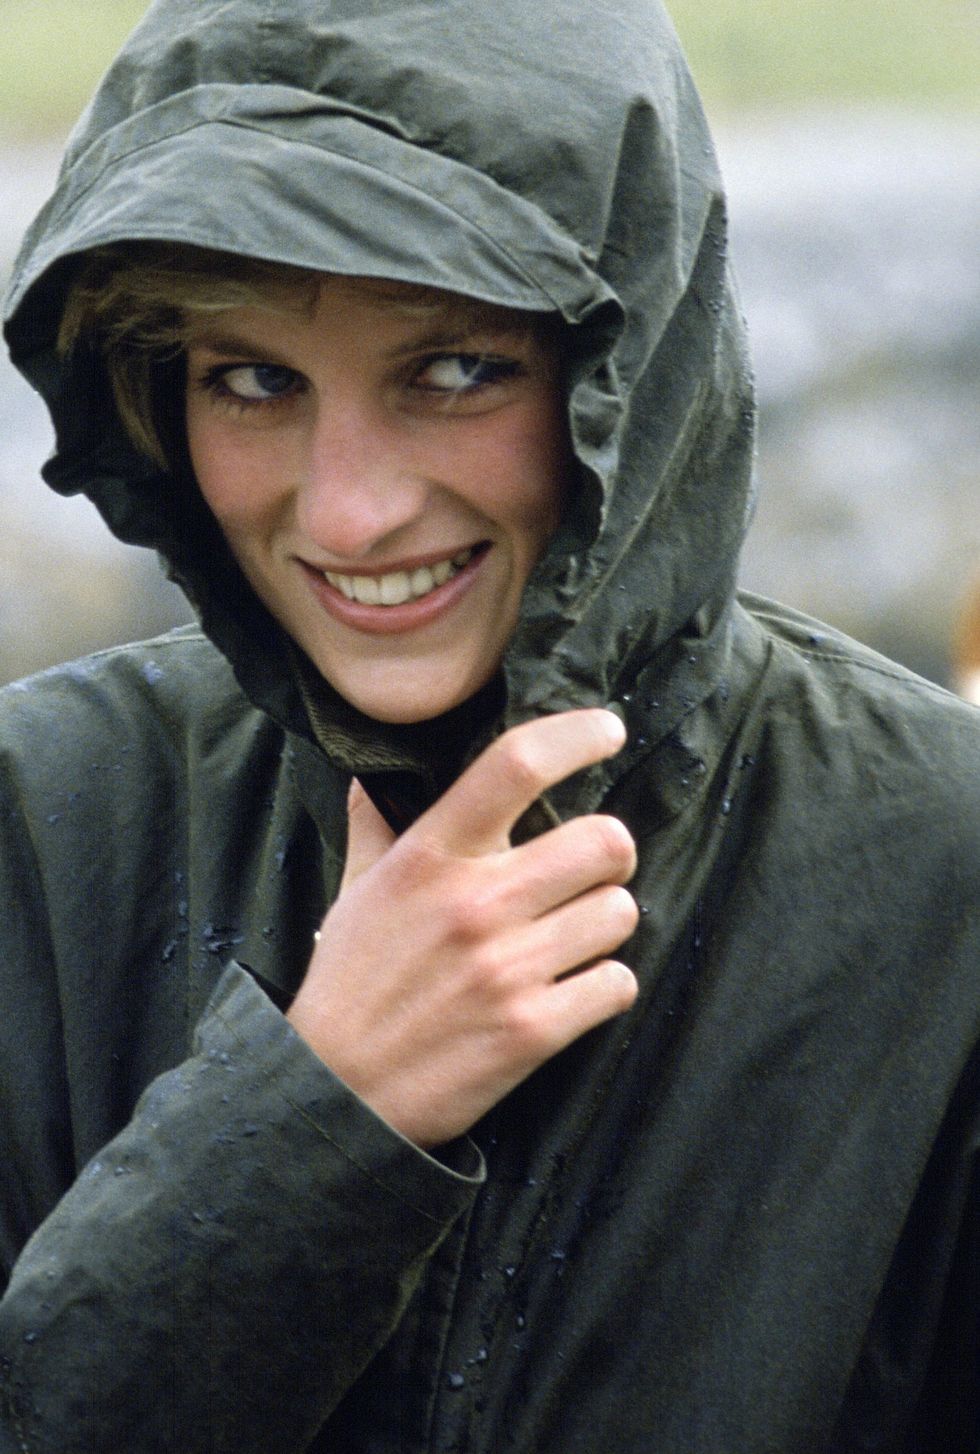 Finger, Sleeve, Outerwear, Facial expression, Jacket, Gesture, Thumb, Hood, Laugh, Portrait photography, 